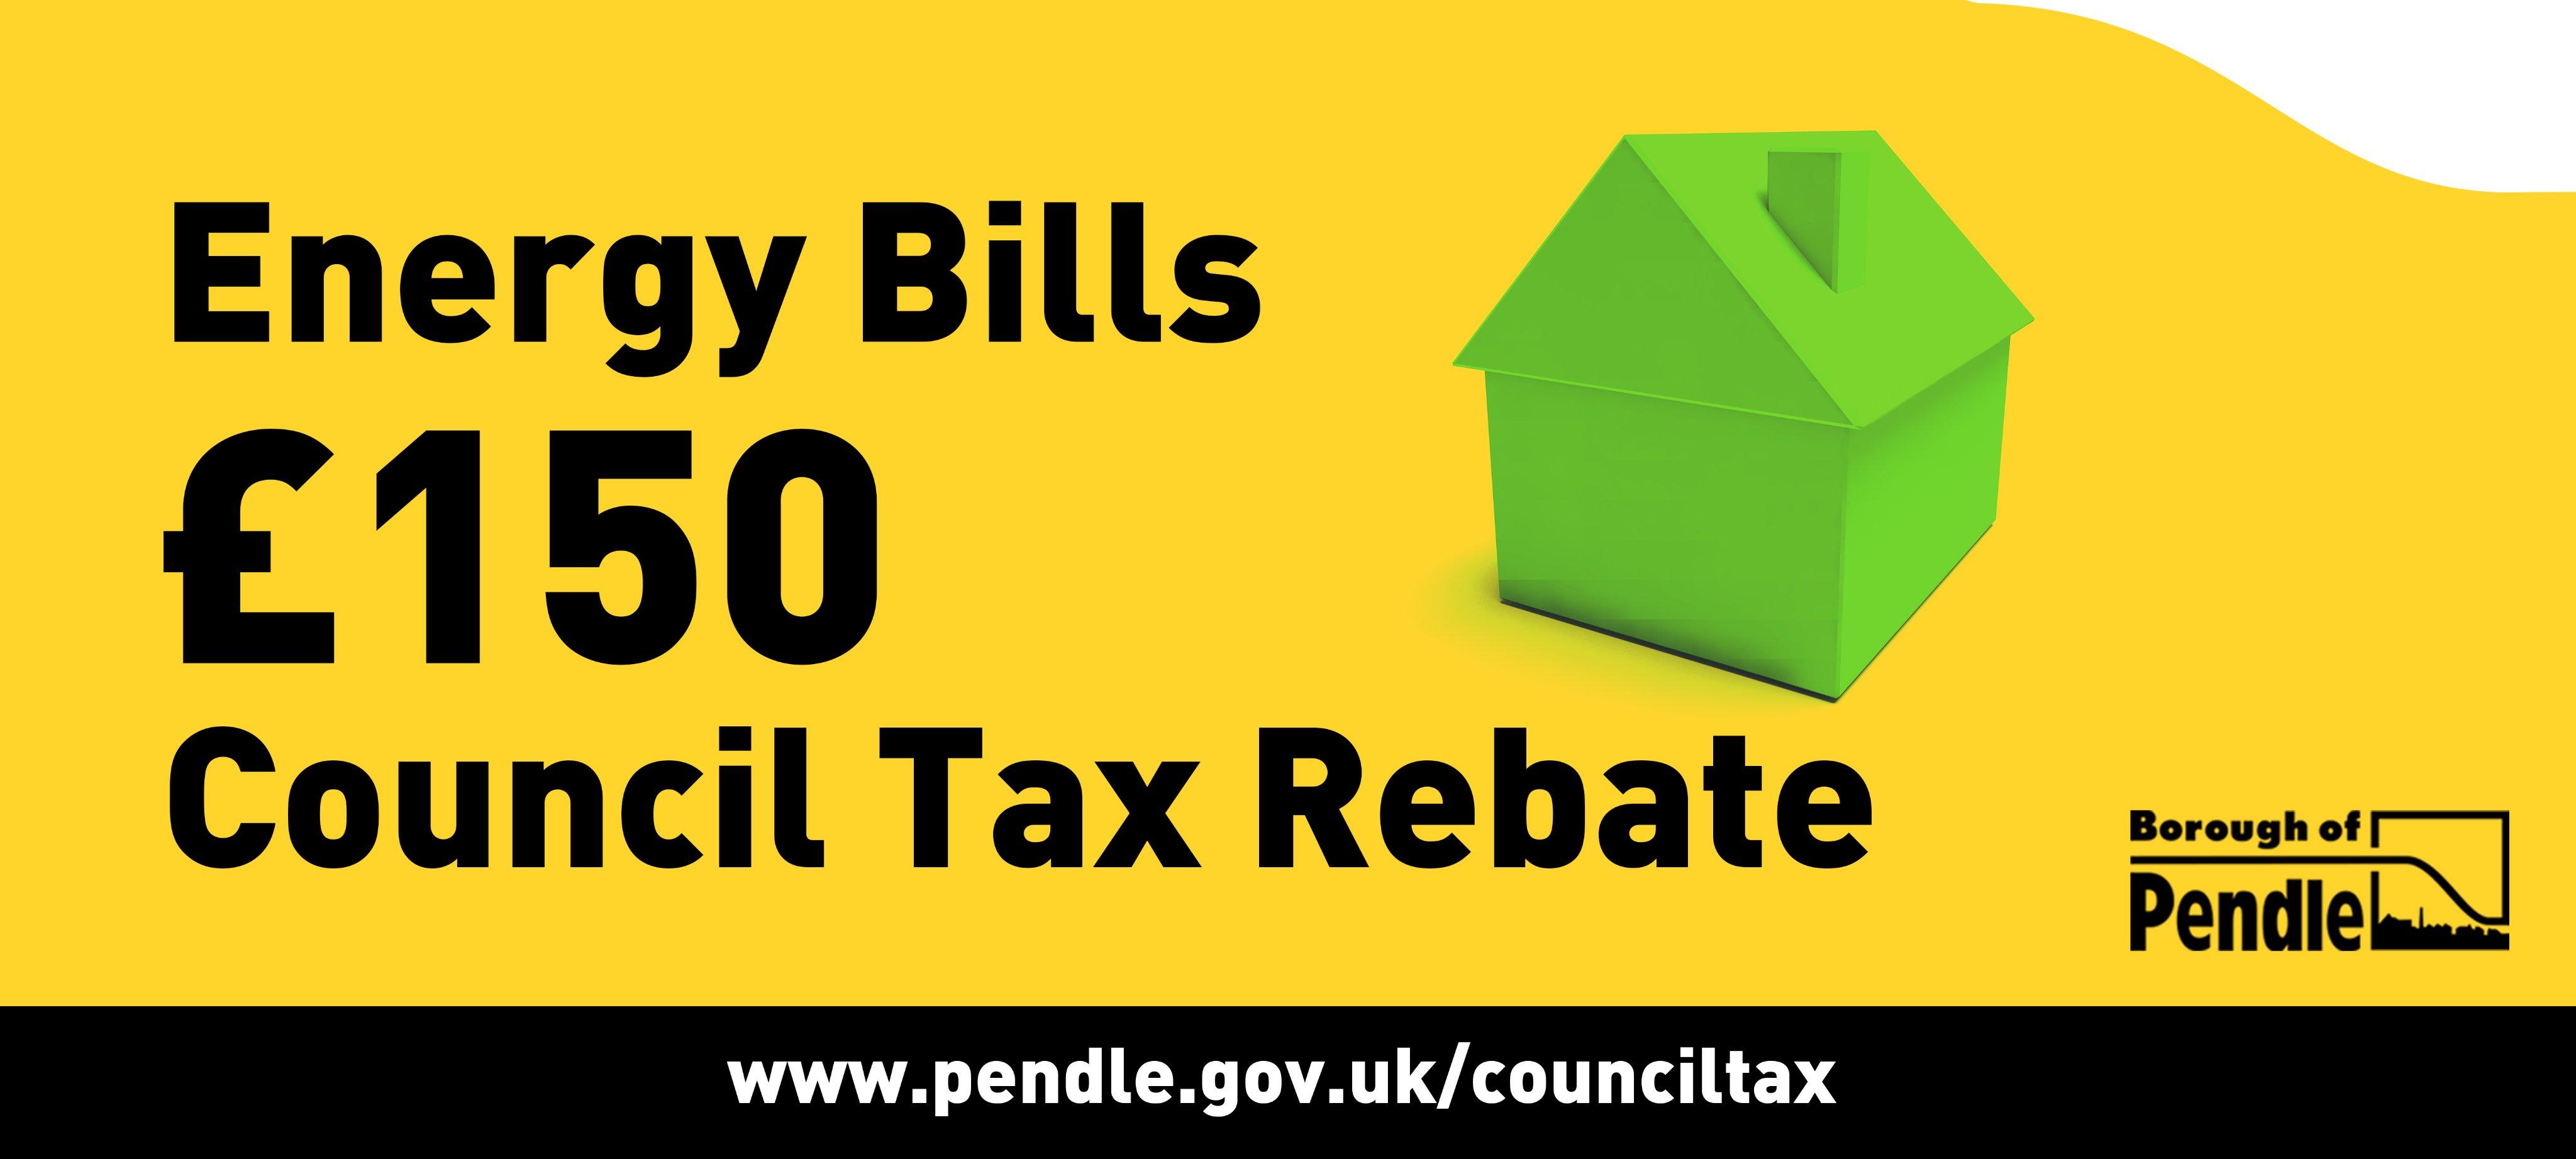 Latest on Pendle’s Council Tax Rebate payments 